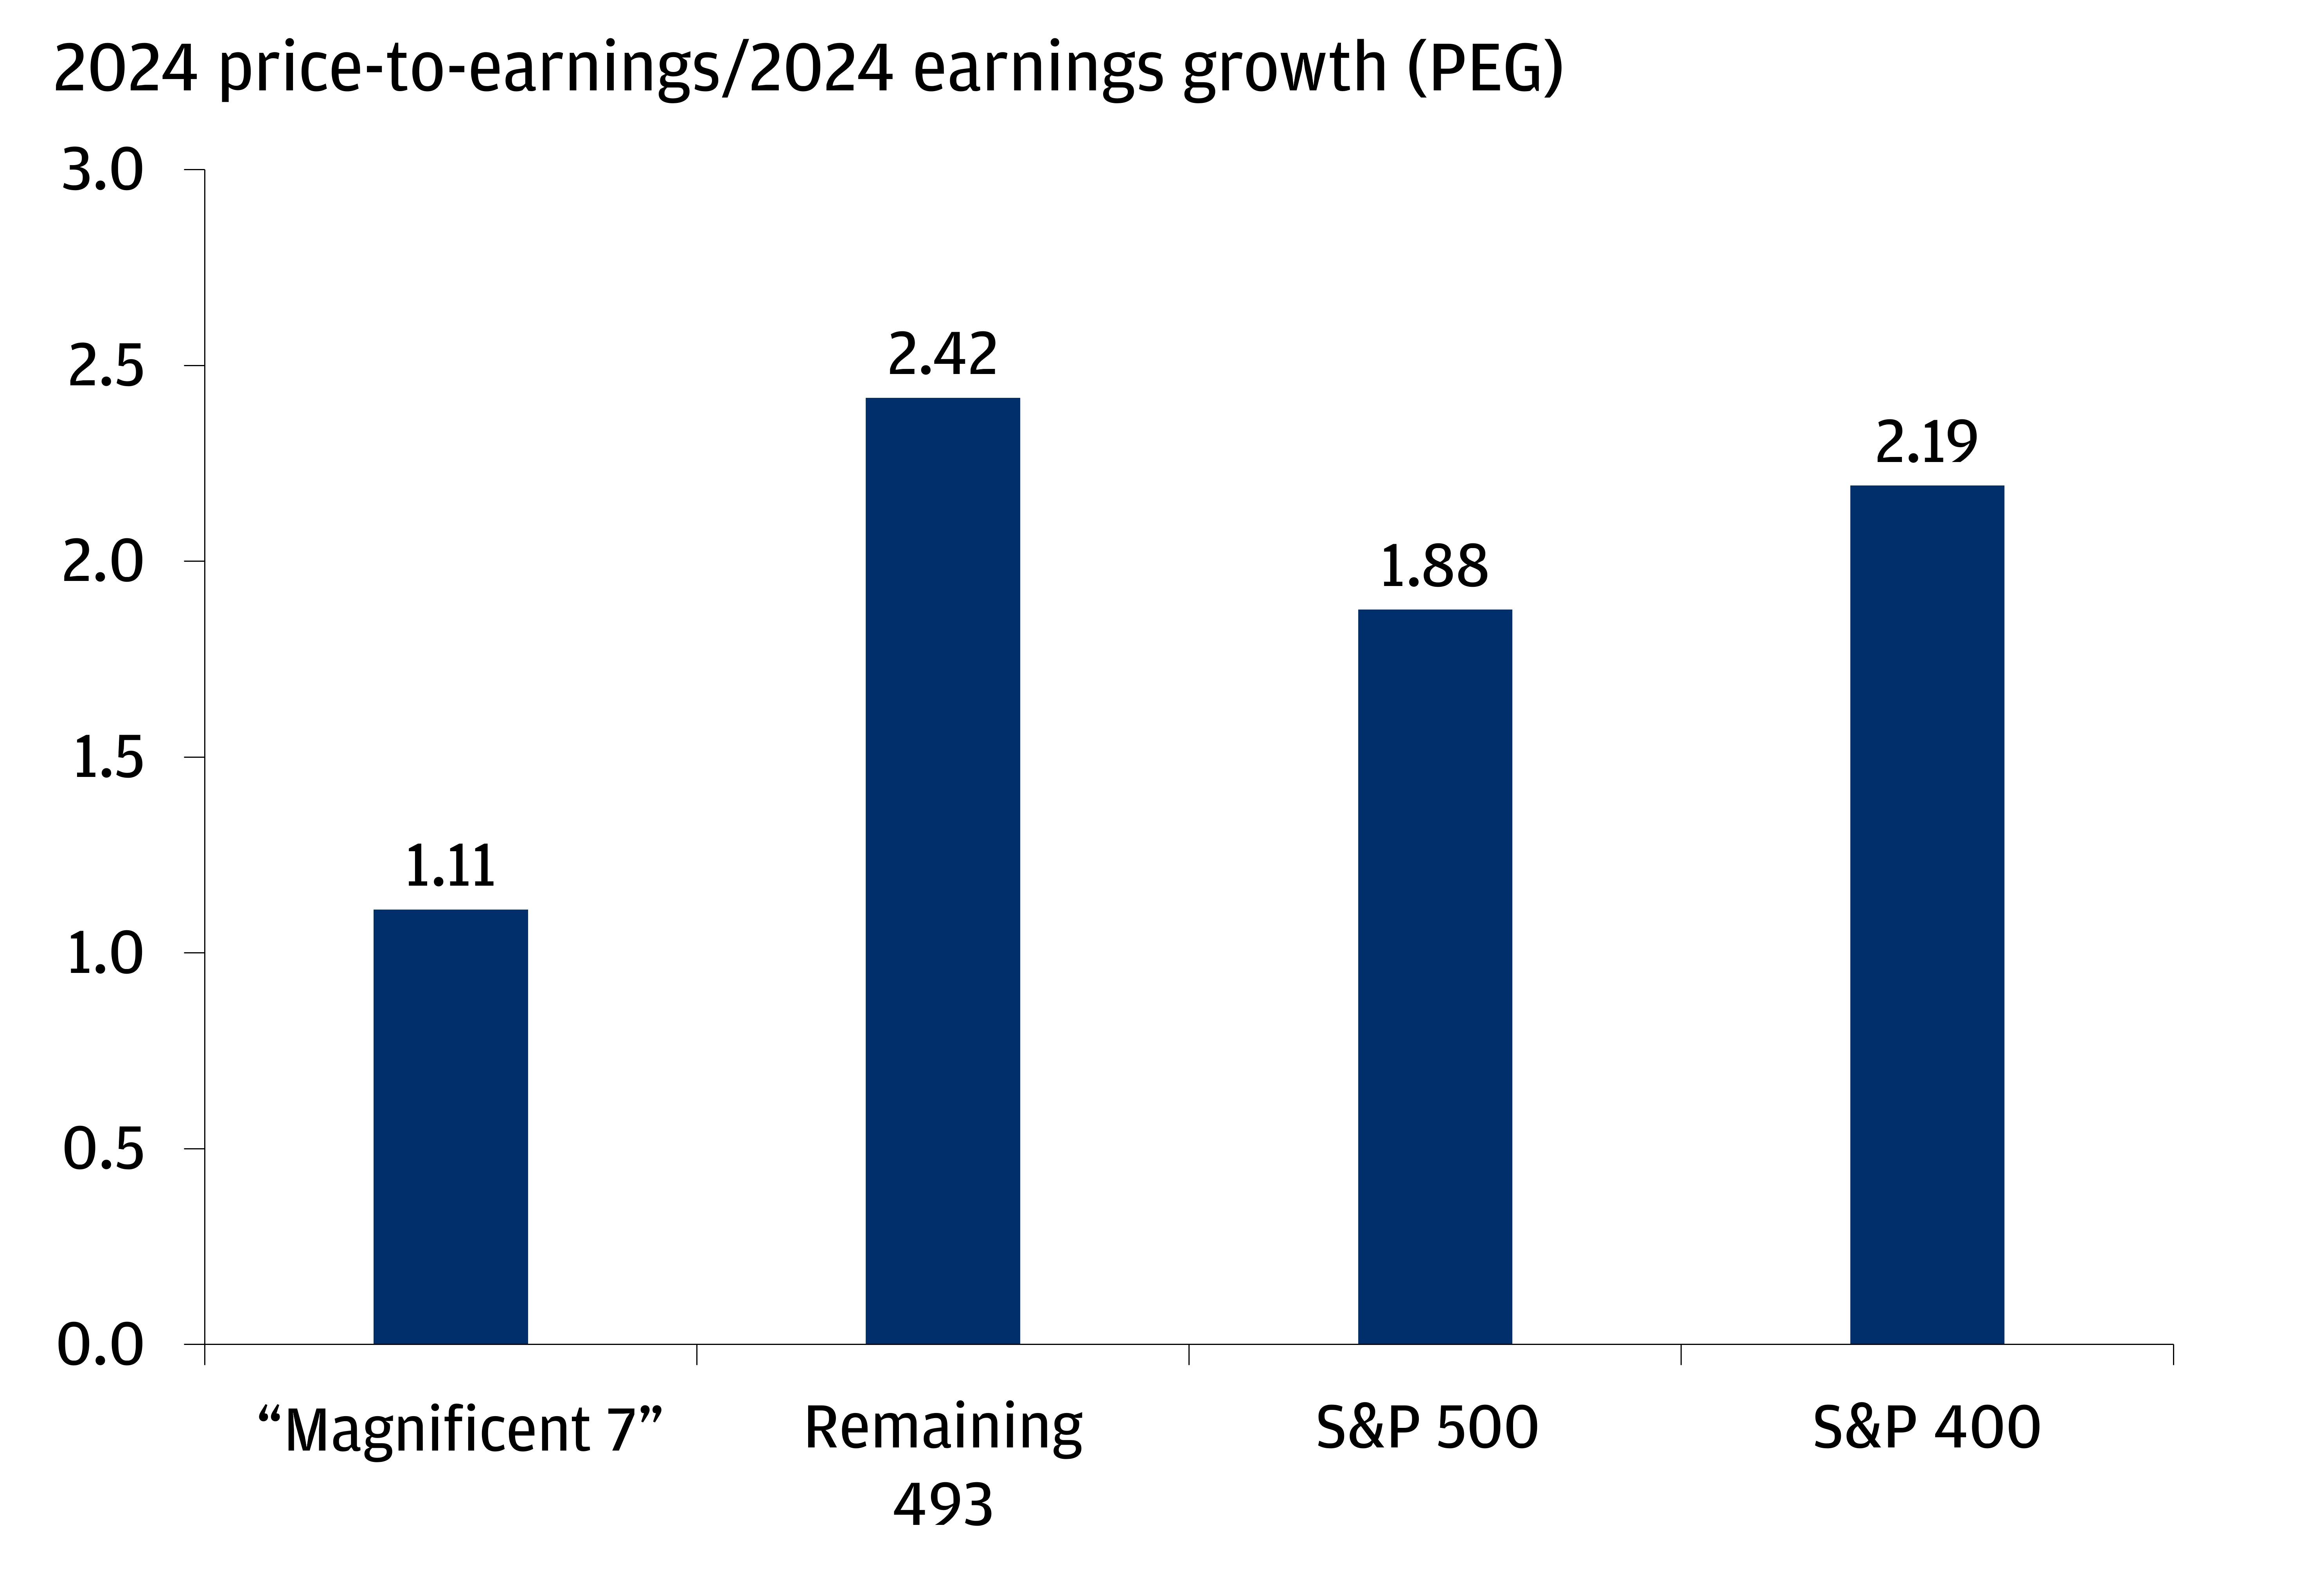 This chart shows 2024 price-to-earnings/2024 earnings growth (PEG) ratio for the Mag-7, remaining 493, S&P 500 and S&P 400 for 2024 and 2025.